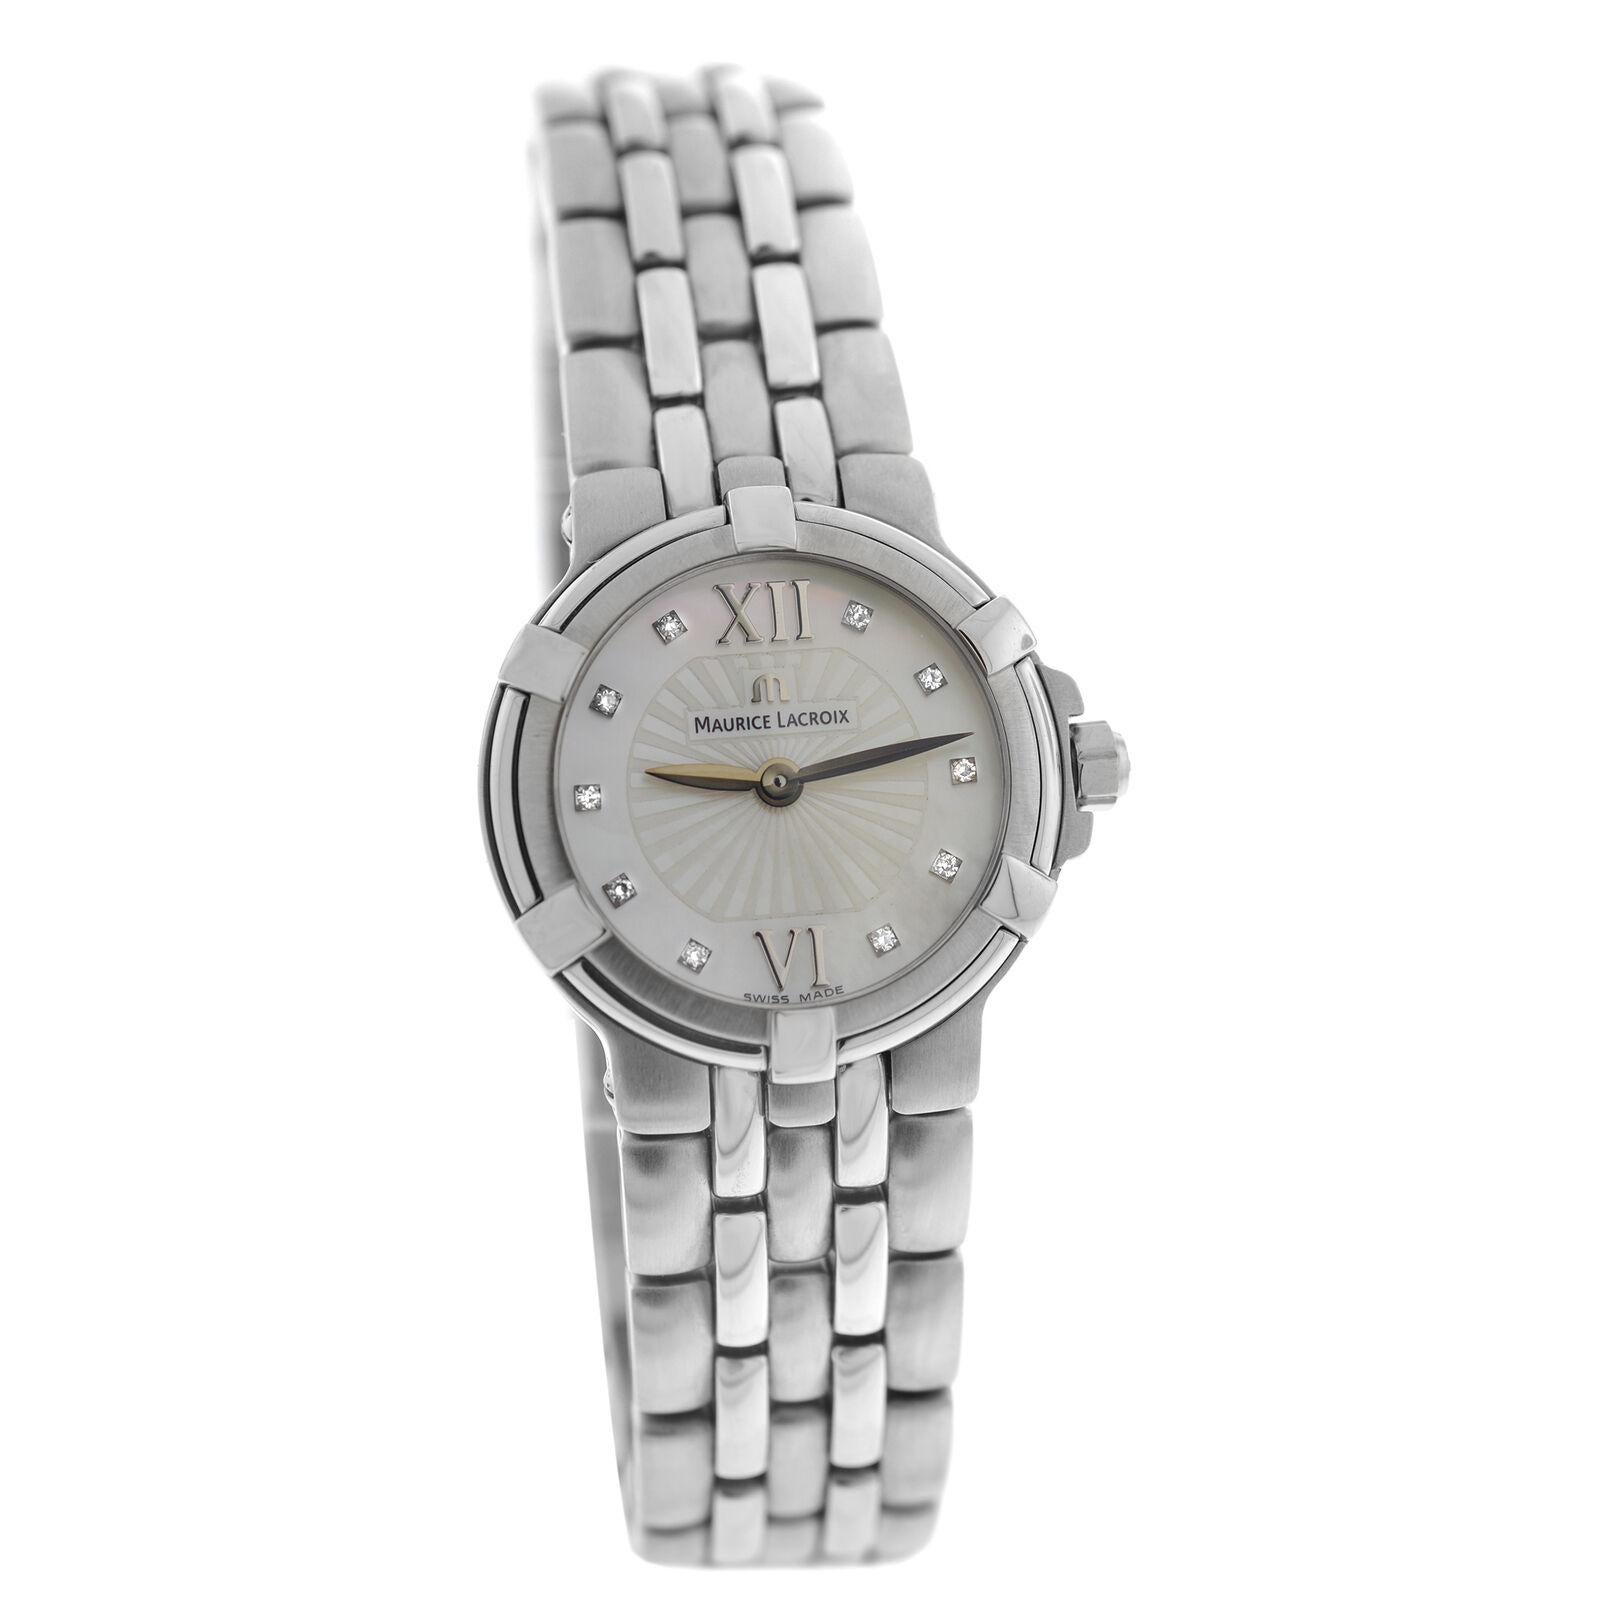 Brand	Maurice Lacroix
Model	Calypso CA1102-SS002-170
Gender	Ladies
Condition	New Store Display Model
Movement	Quartz
Case Material	Stainless Steel 
Bracelet / Strap Material	Stainless Steel 
Clasp / Buckle Material	Stainless Steel
Clasp